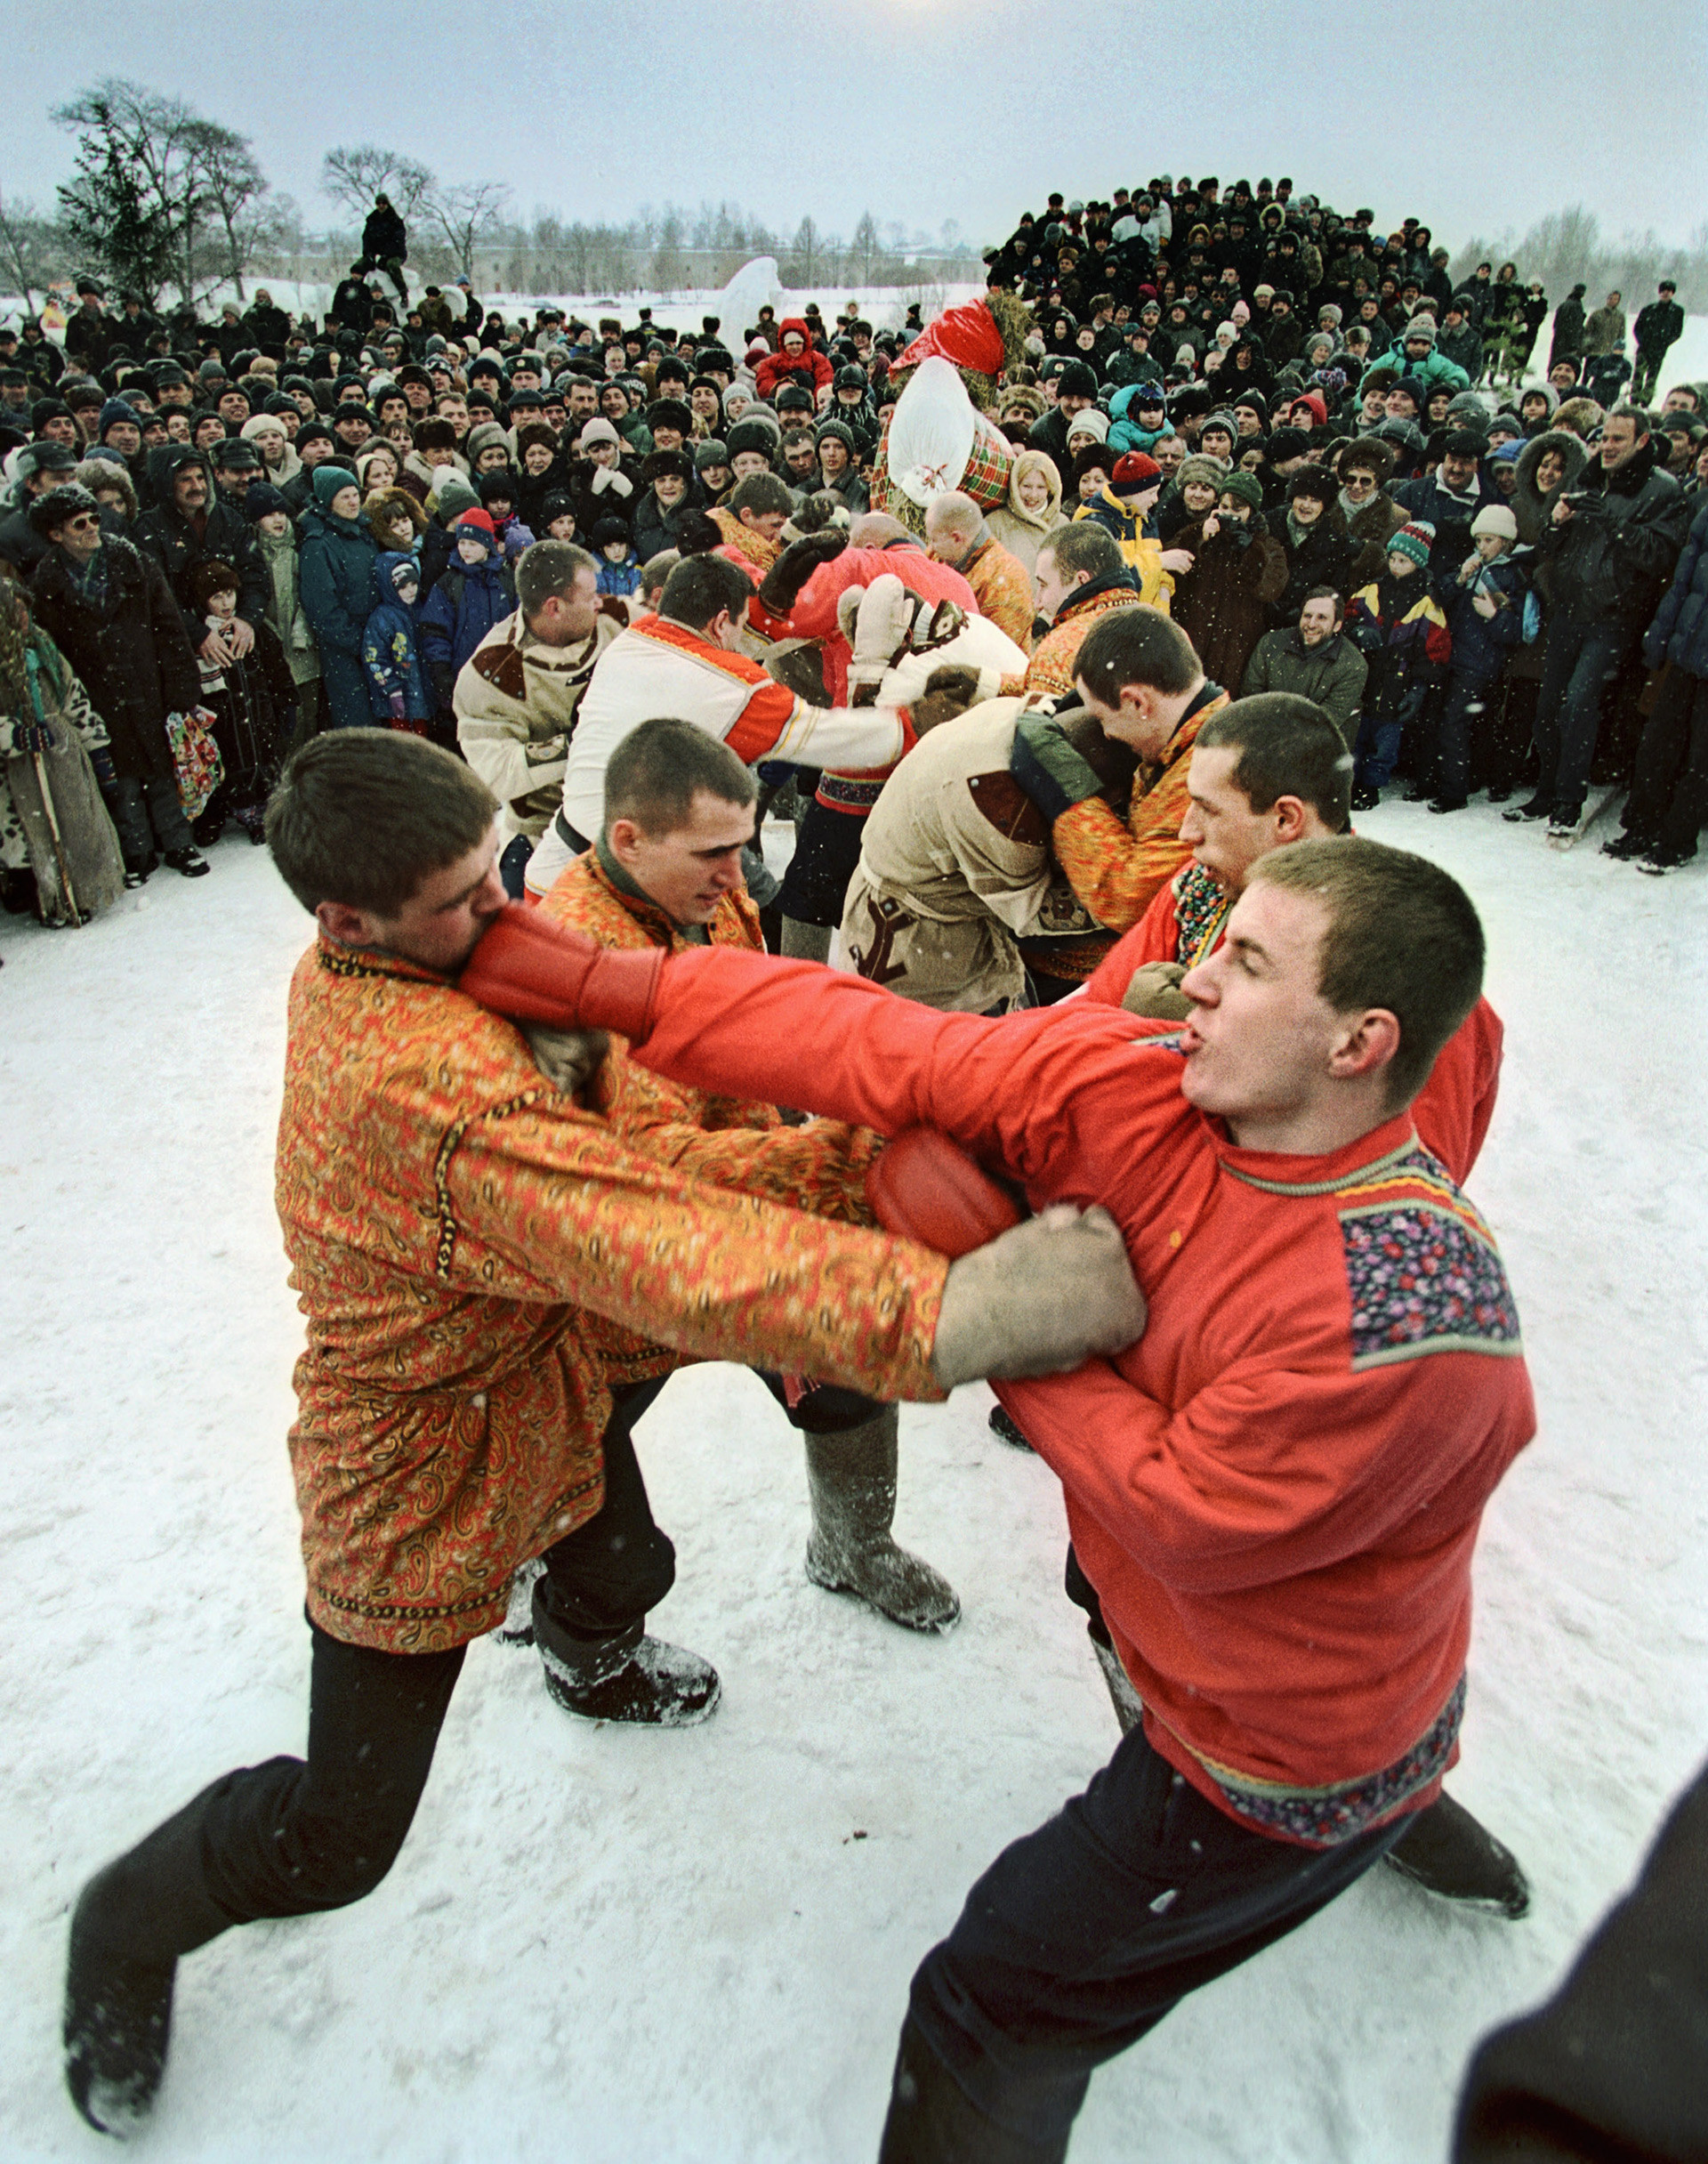 A tradtional fist fight during the Shrovetide celebrations in Suzdal